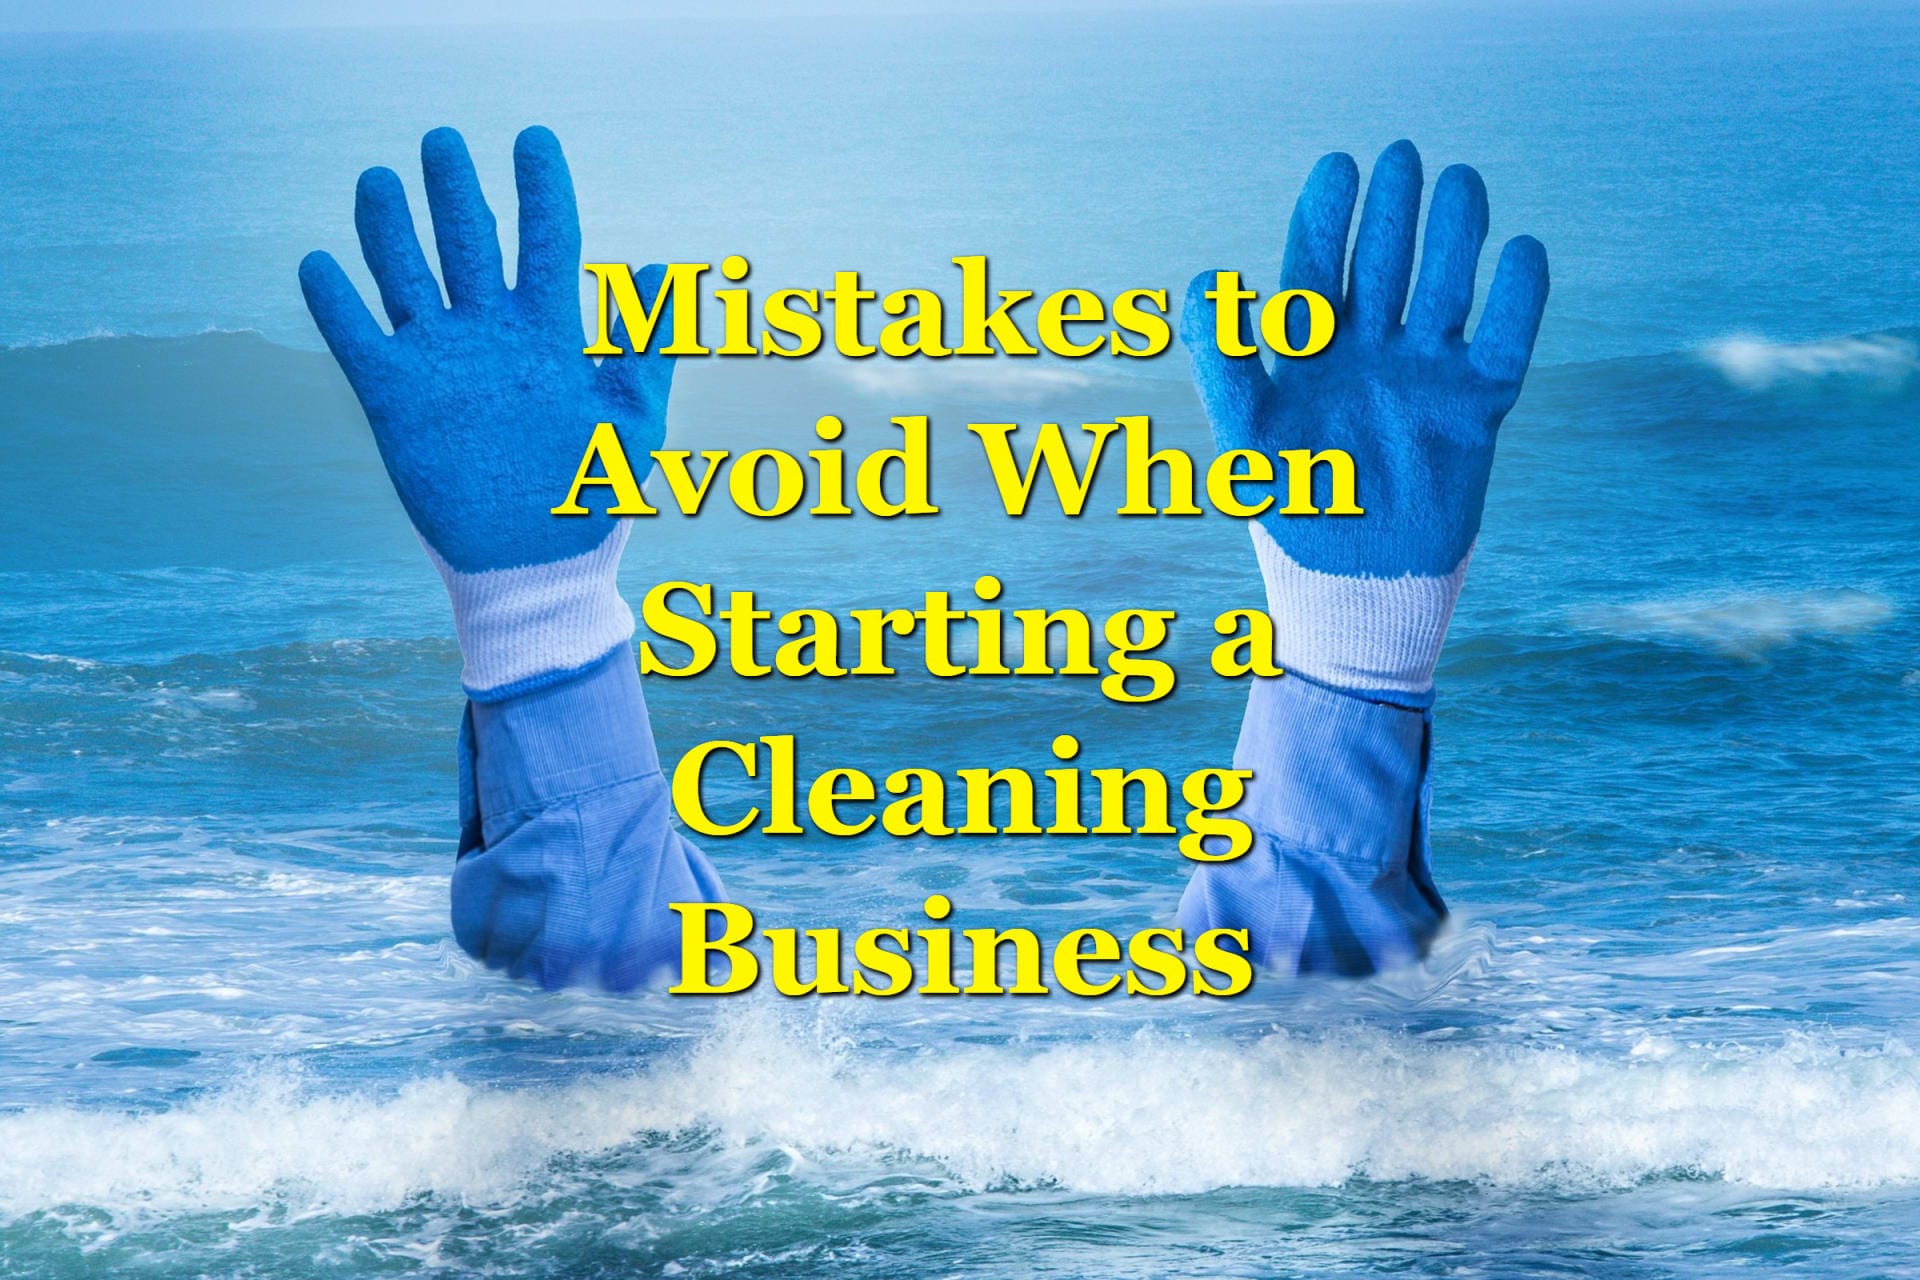 Mistakes to Avoid When Starting a Cleaning Business